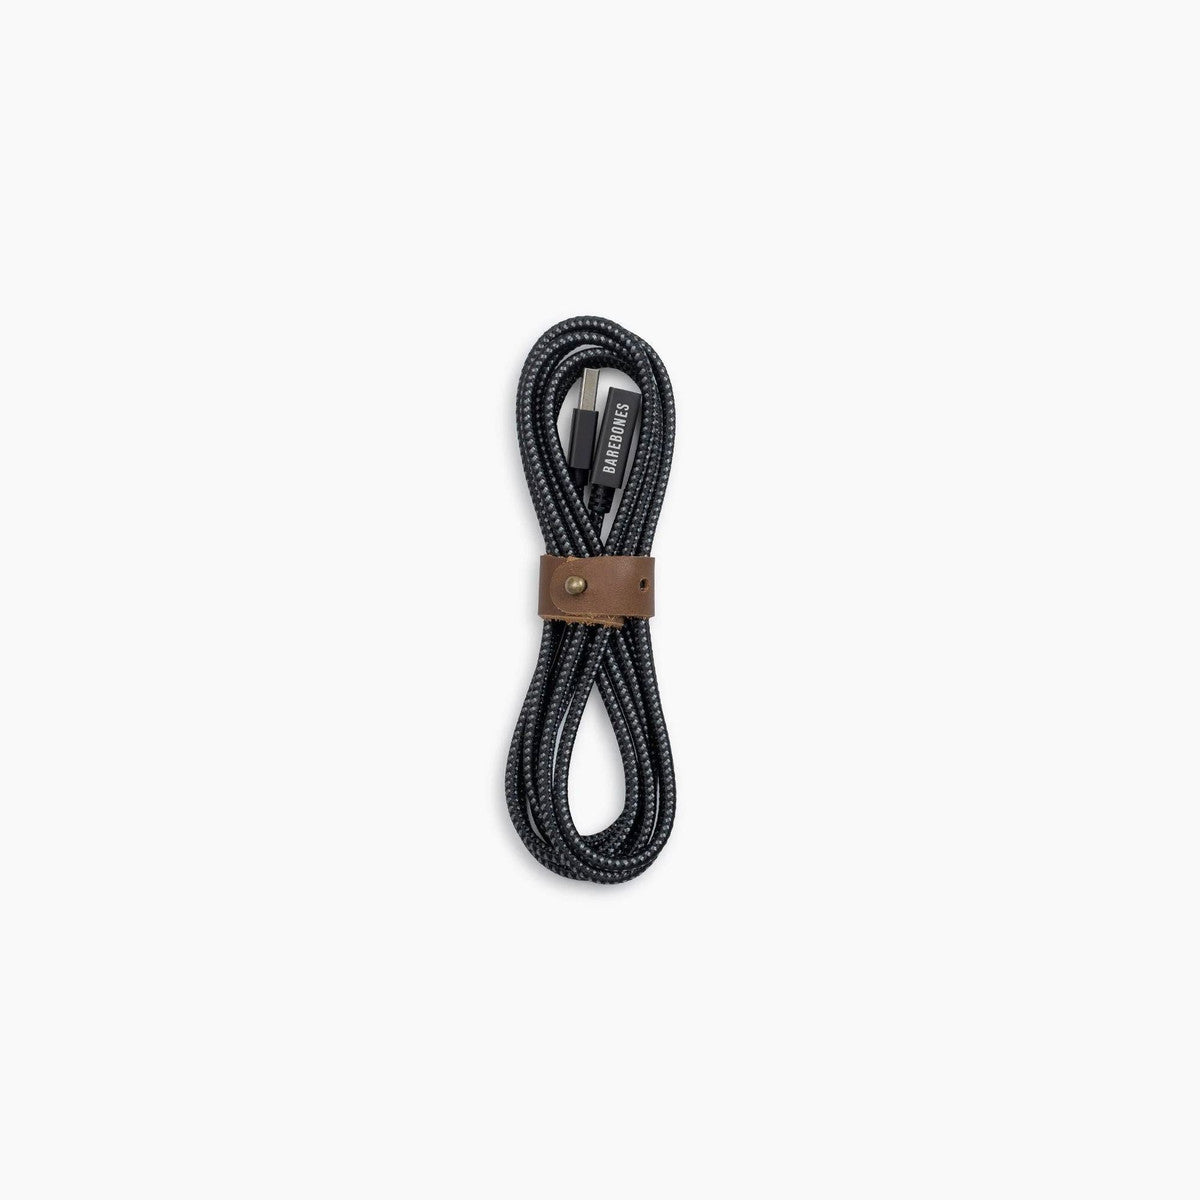 2.0 USB Extension Cable - 2 m - BaseCamp Provisions